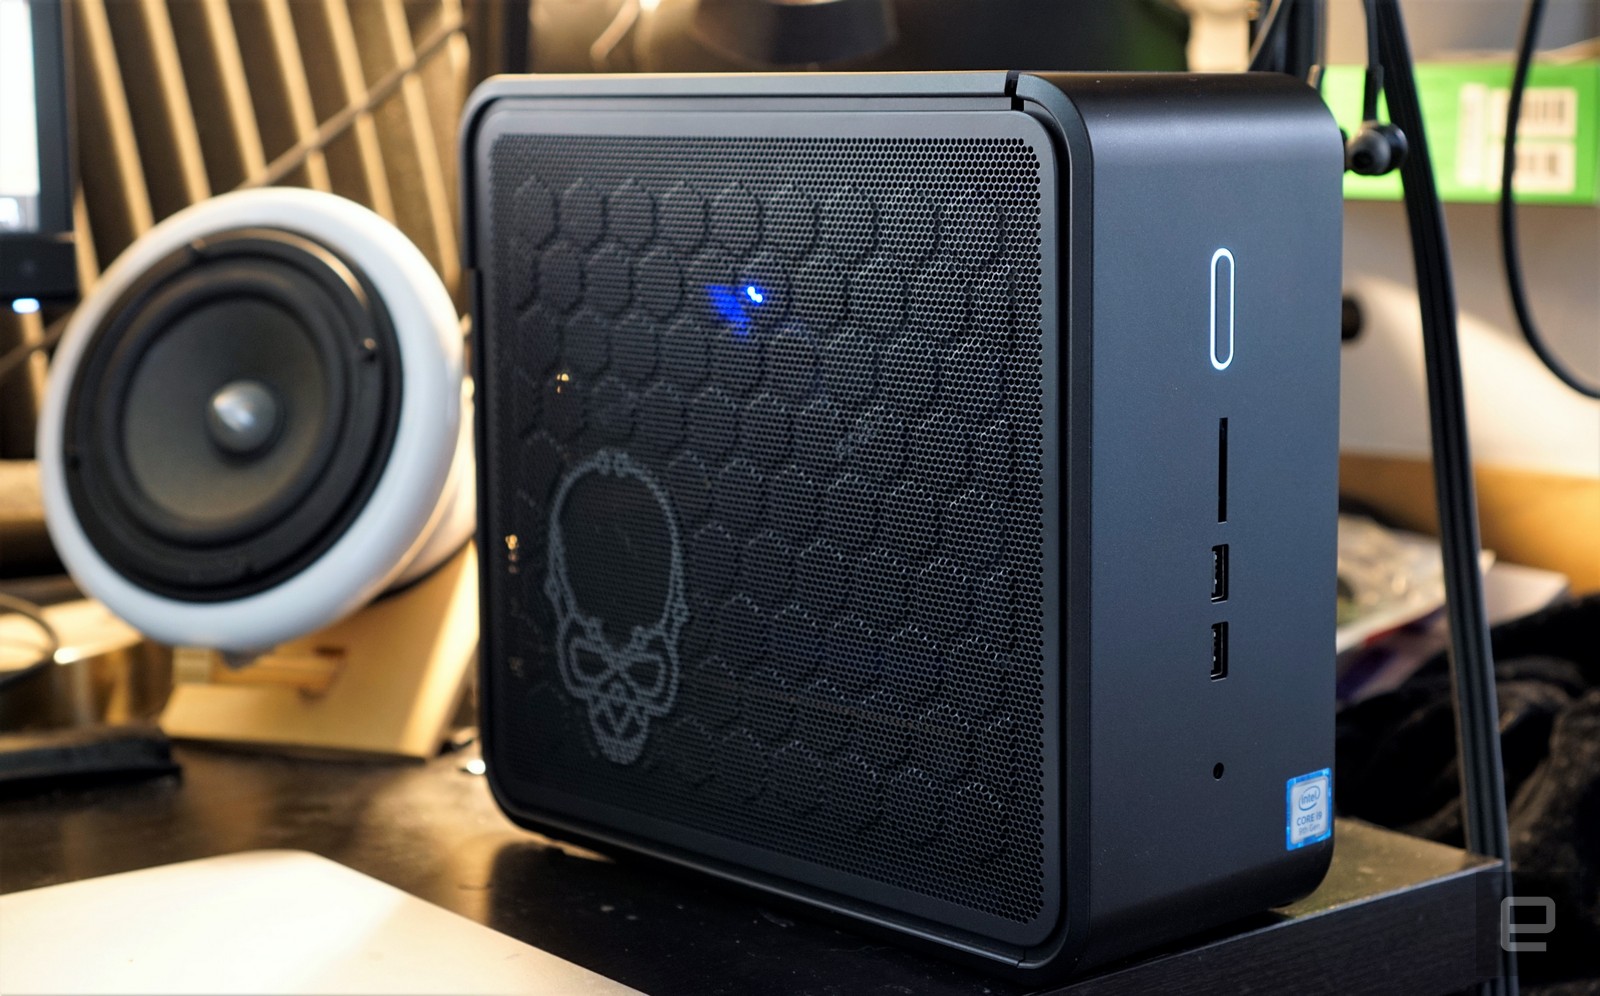 Intel's NUC 9 Extreme is the new king of tiny gaming PCs